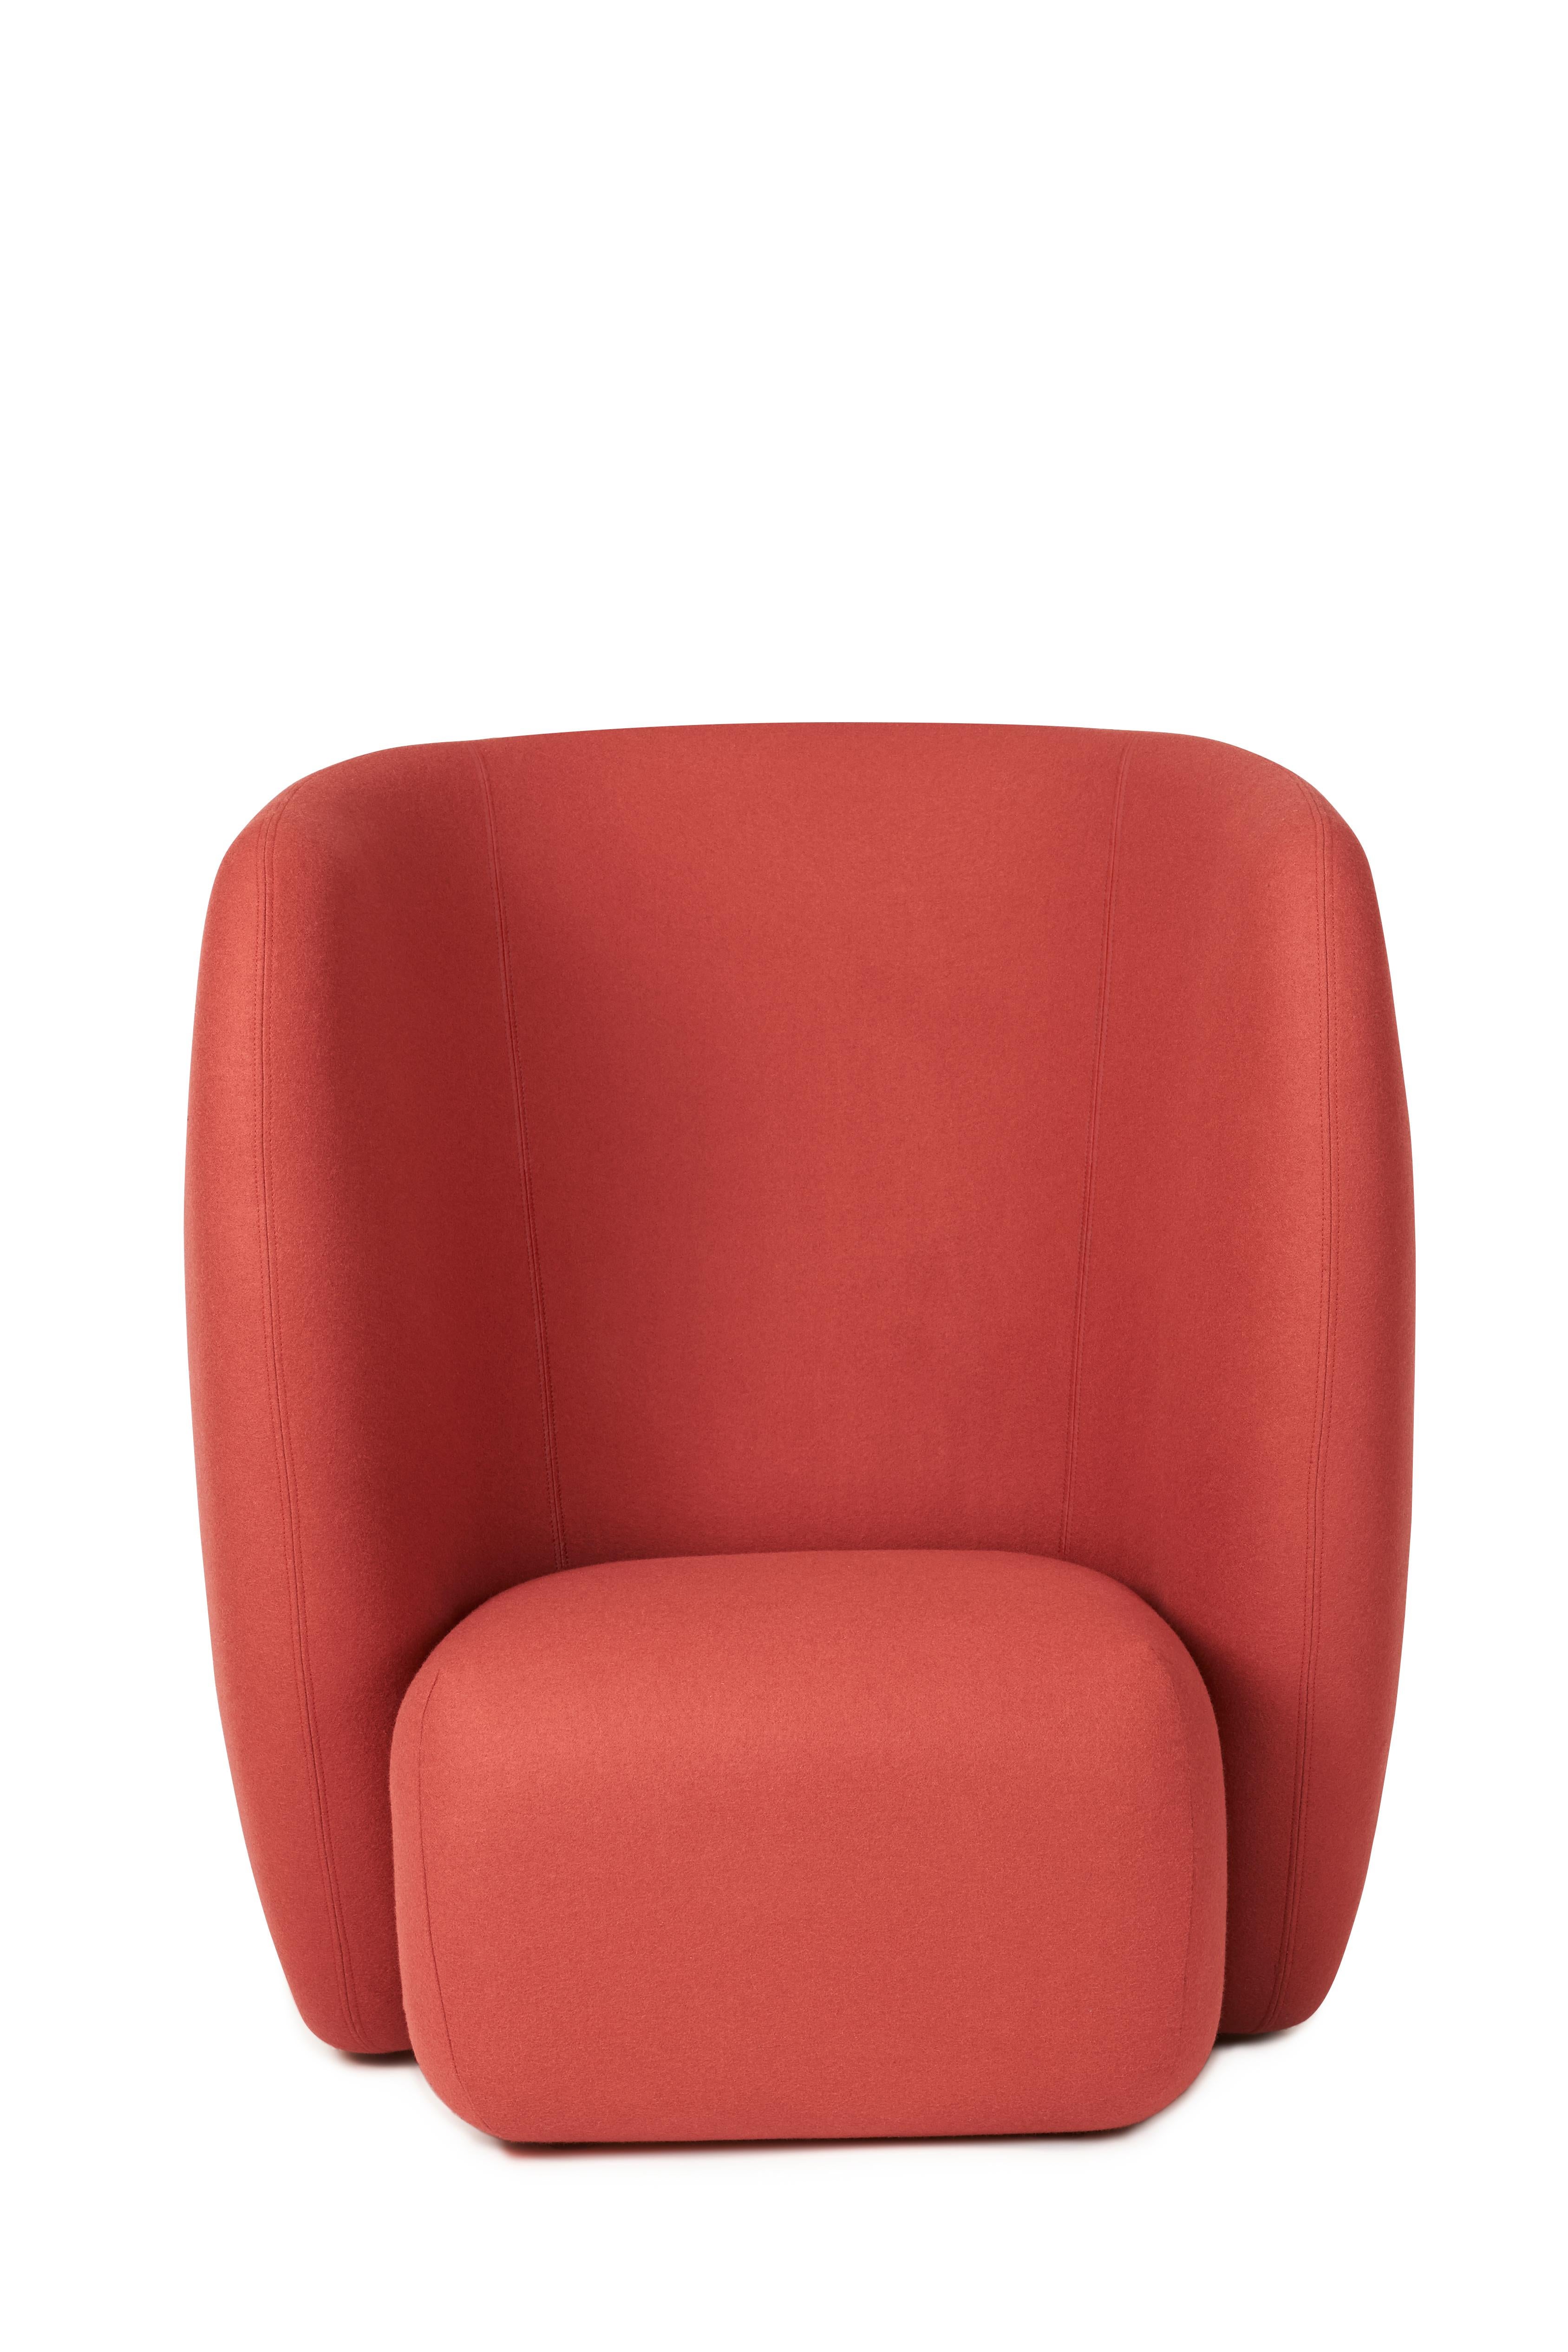 For Sale: Red (Hero 551) Haven Lounge Chair, by Charlotte Høncke from Warm Nordic